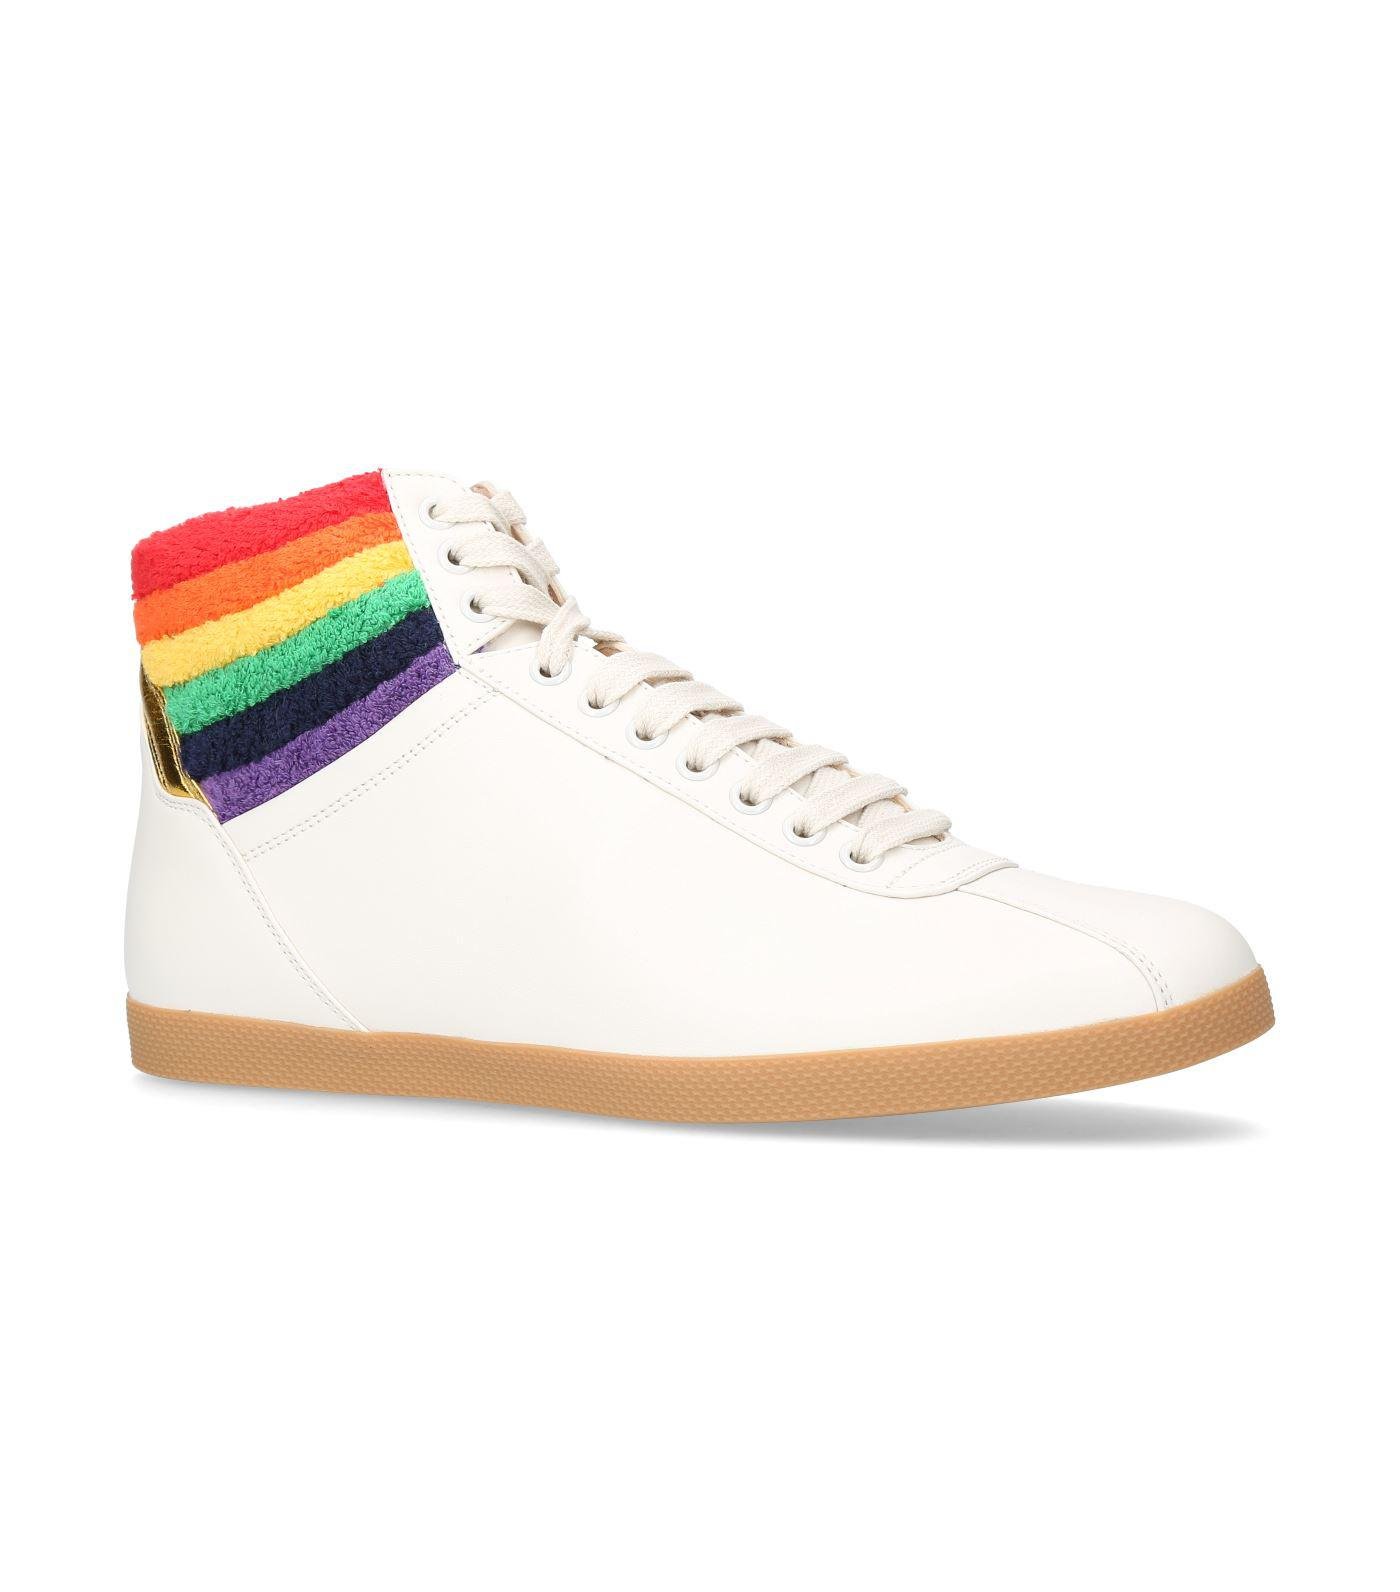 Gucci Leather Bambi Rainbow Hightop Sneakers in White Lyst